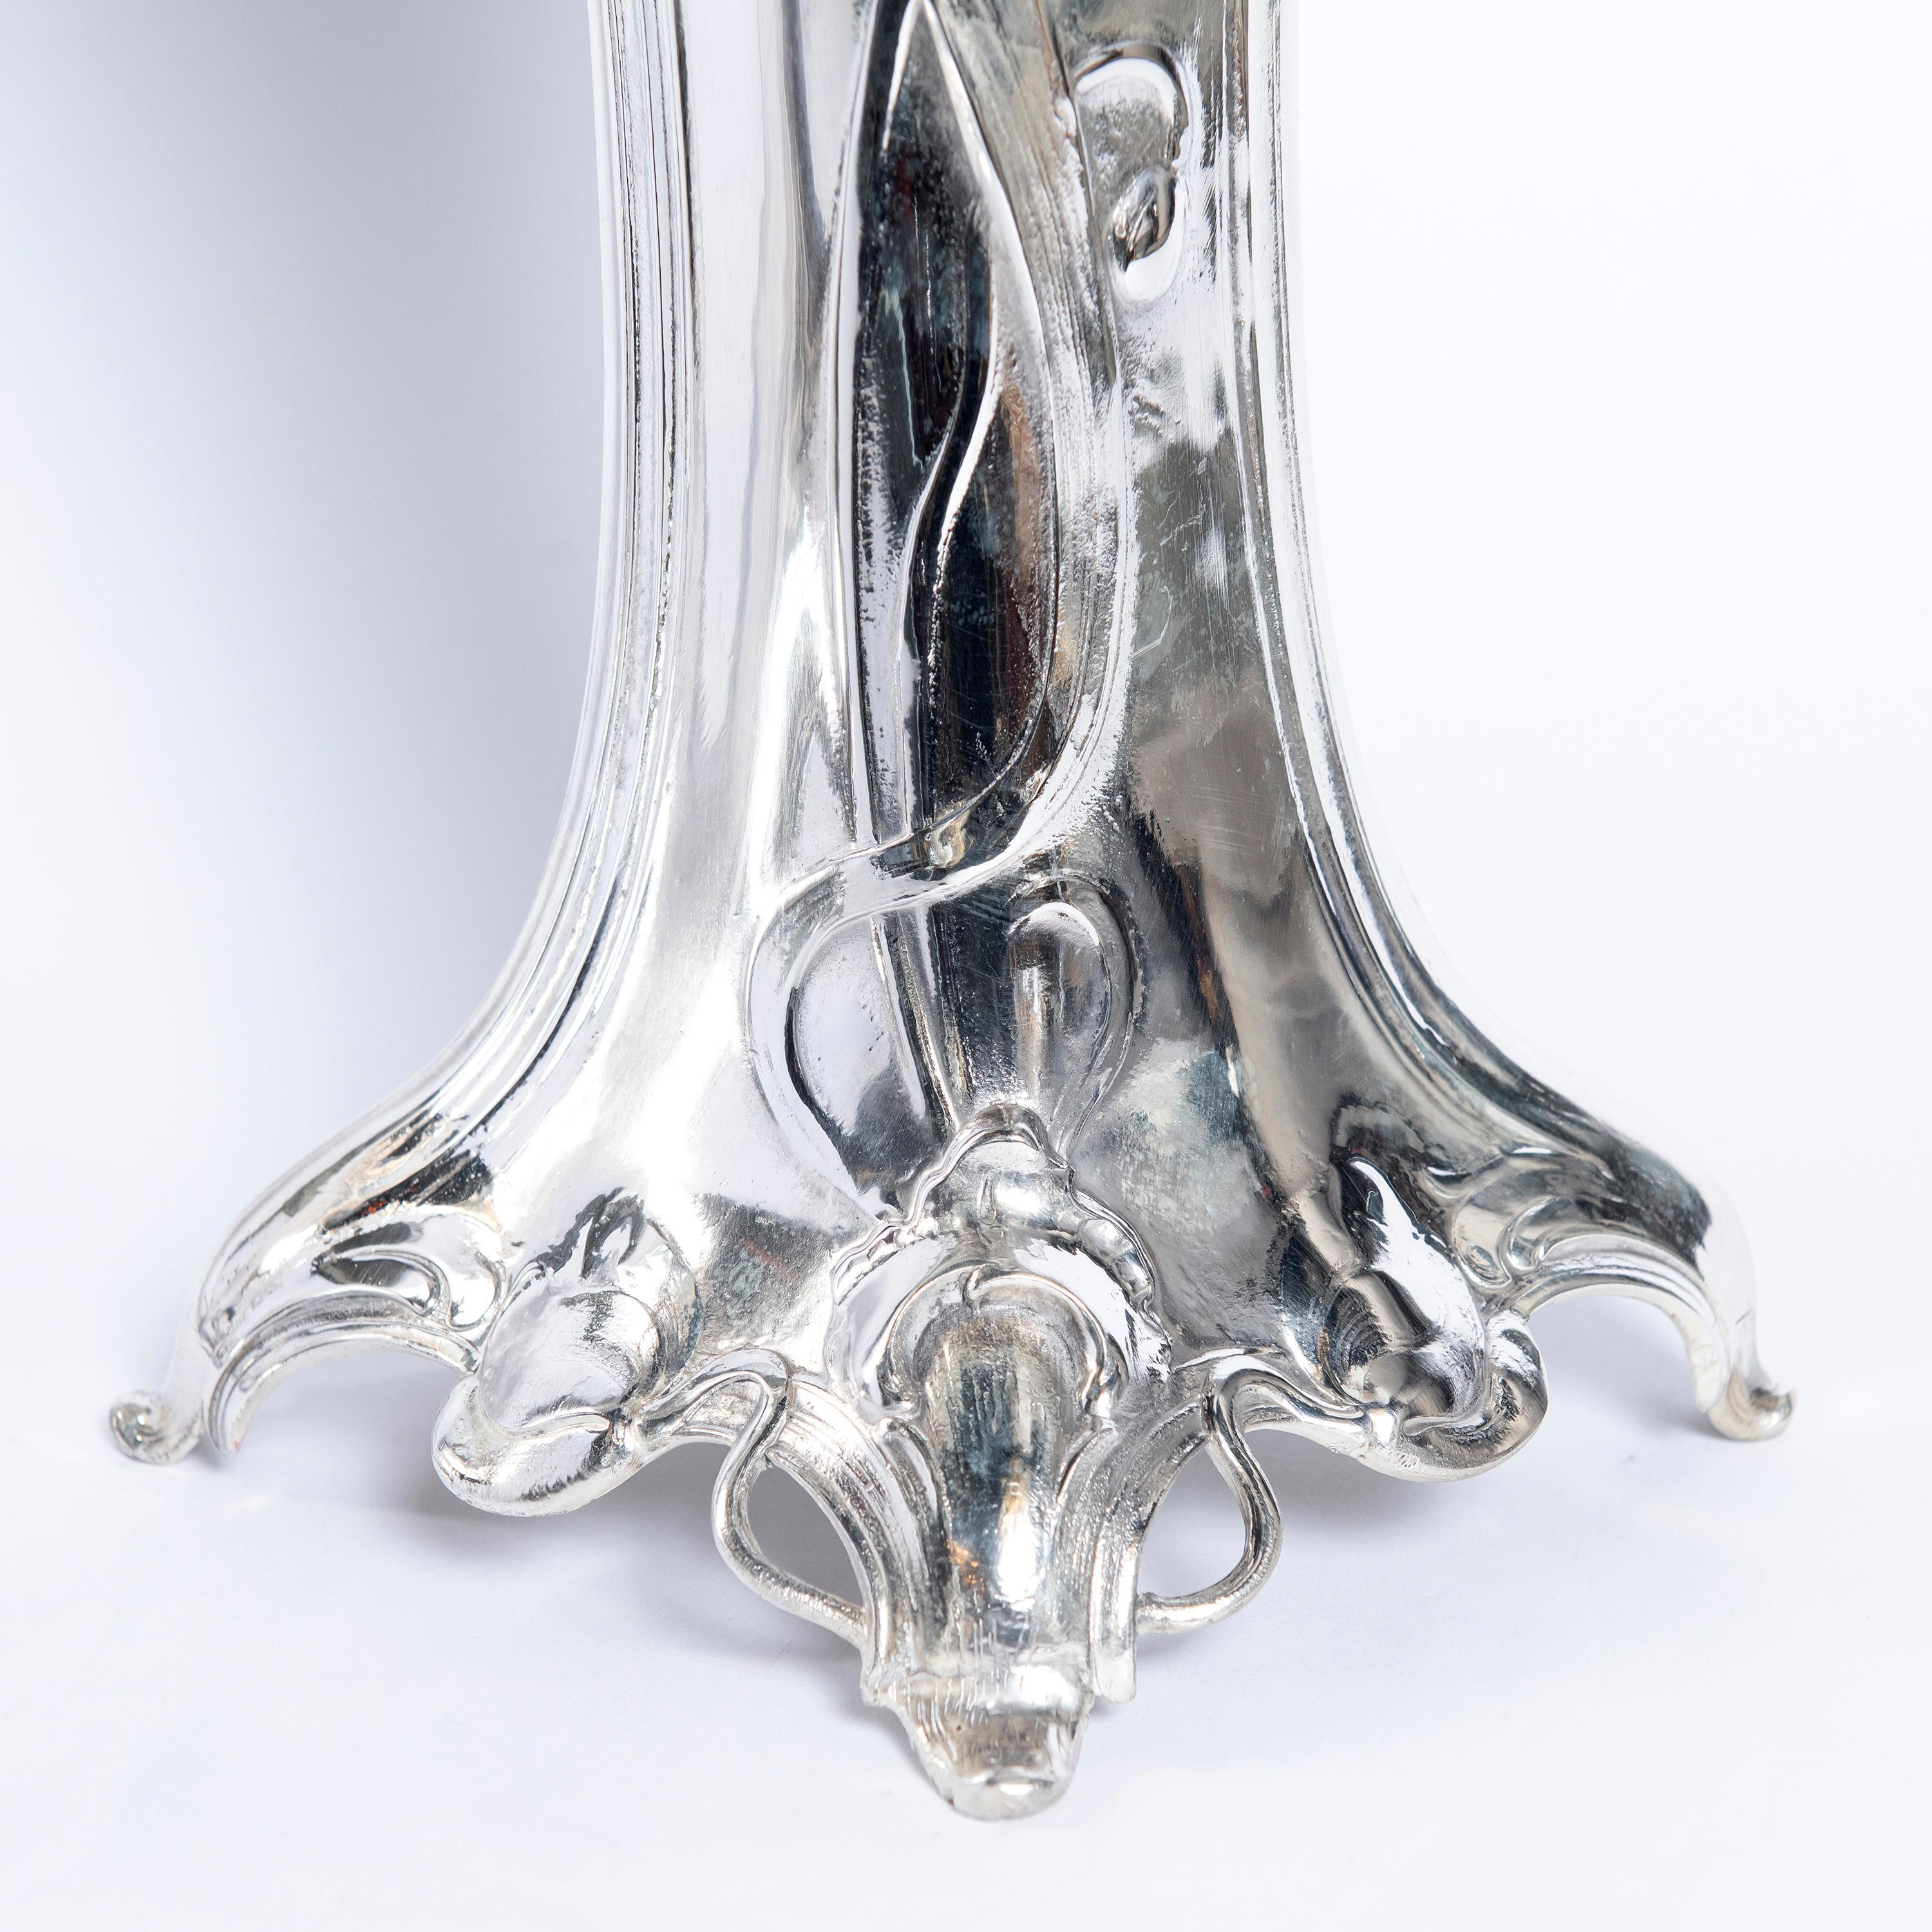 German Pair of W.M.F. Silver Plate Flower Vases with Glass, Jugendstil Period For Sale